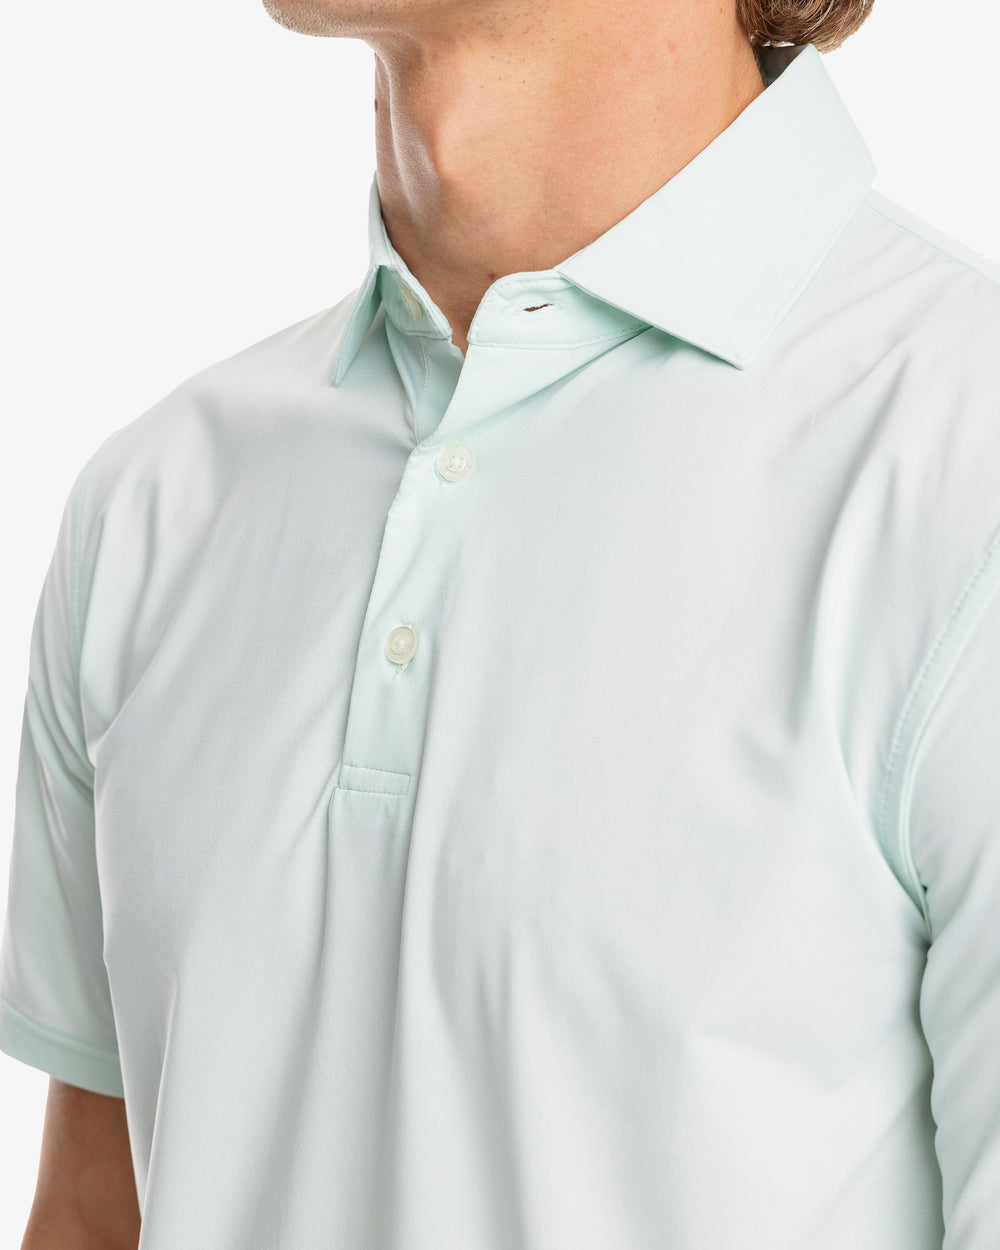 The model detail view of the Men's Sawgrass Stripe brrr°®-eeze Performance Polo Shirt by Southern Tide - Mist Green